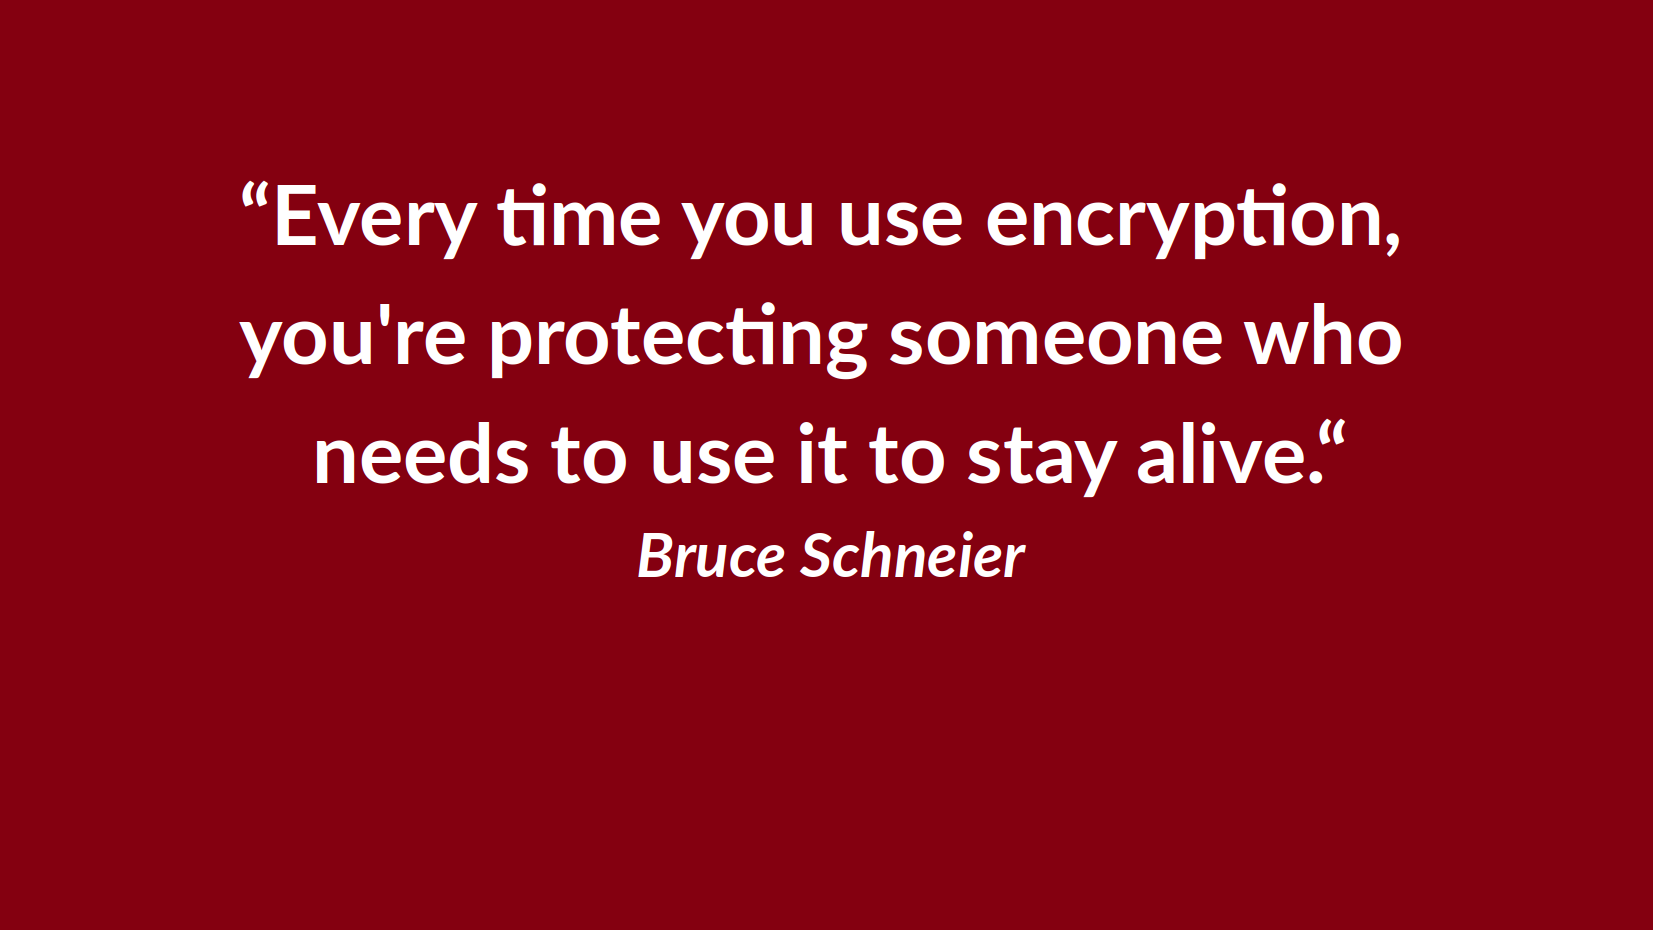 Fight for privacy: Encryption protects everyone's privacy